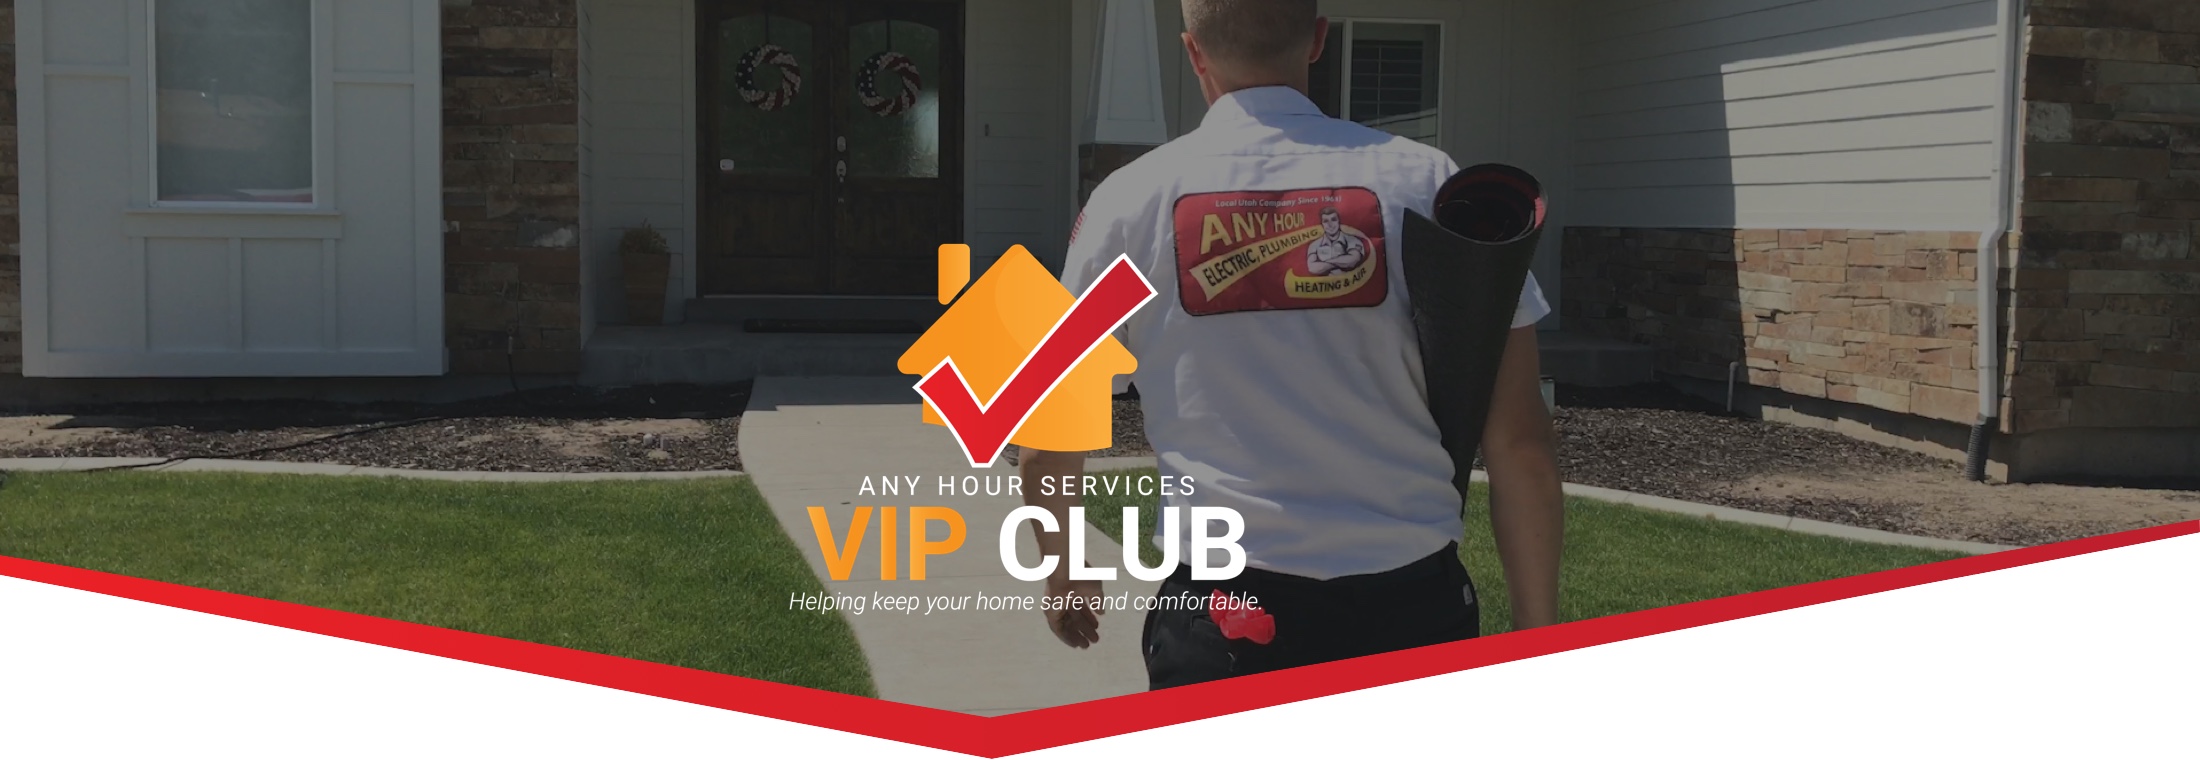 Any Hour Services VIP club